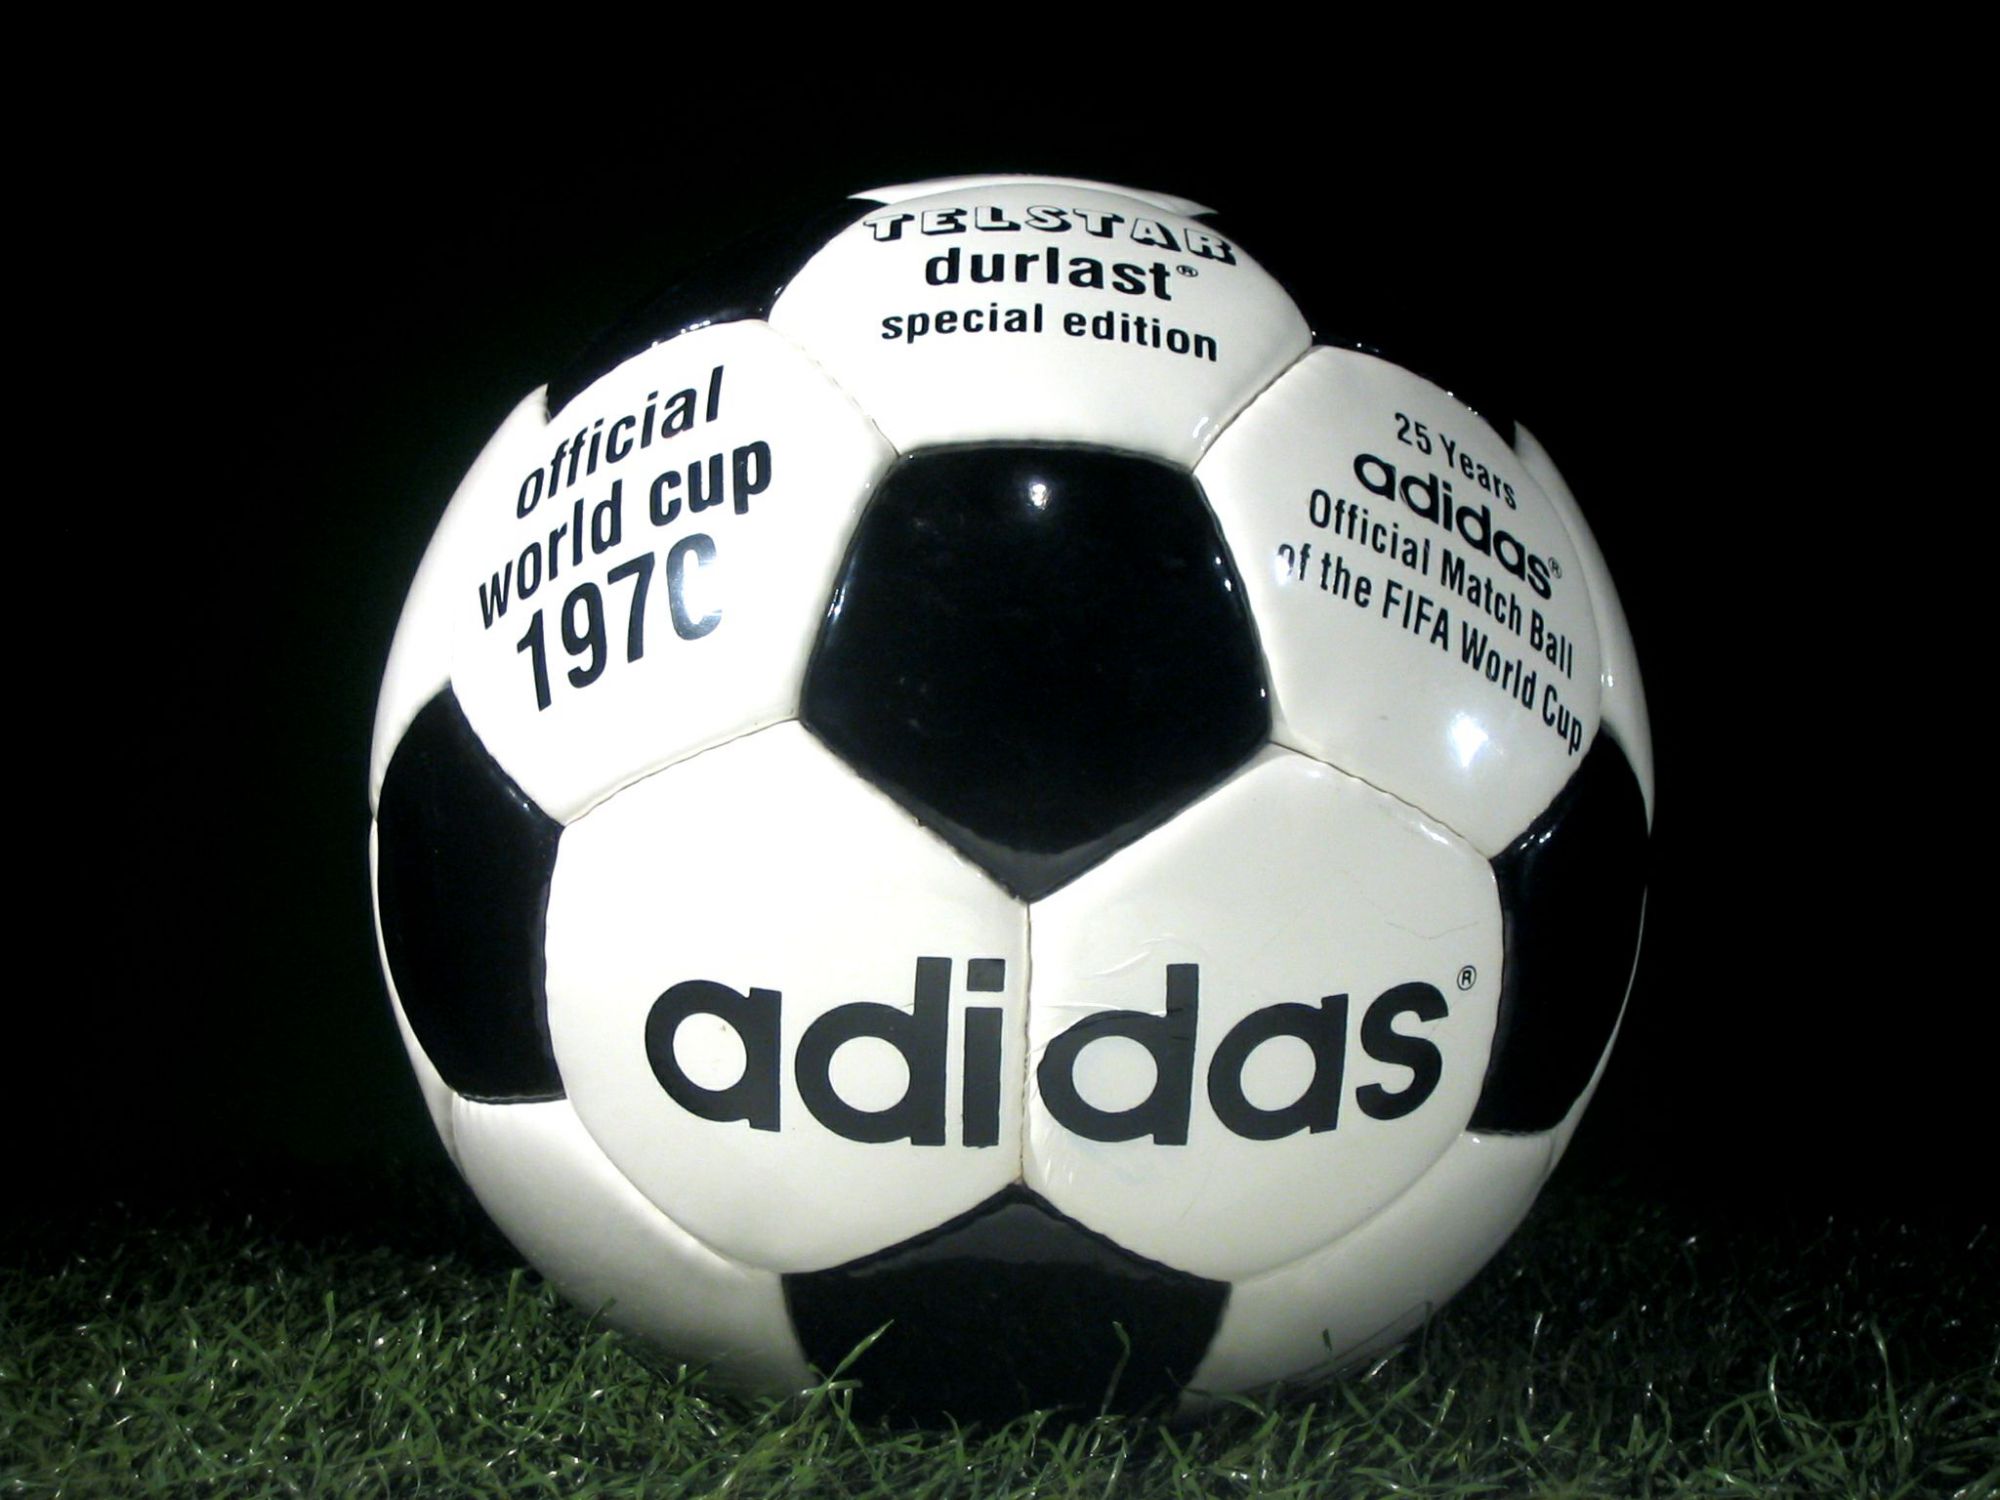 Offical Ball for Football world cup 1970. Made by Adidas